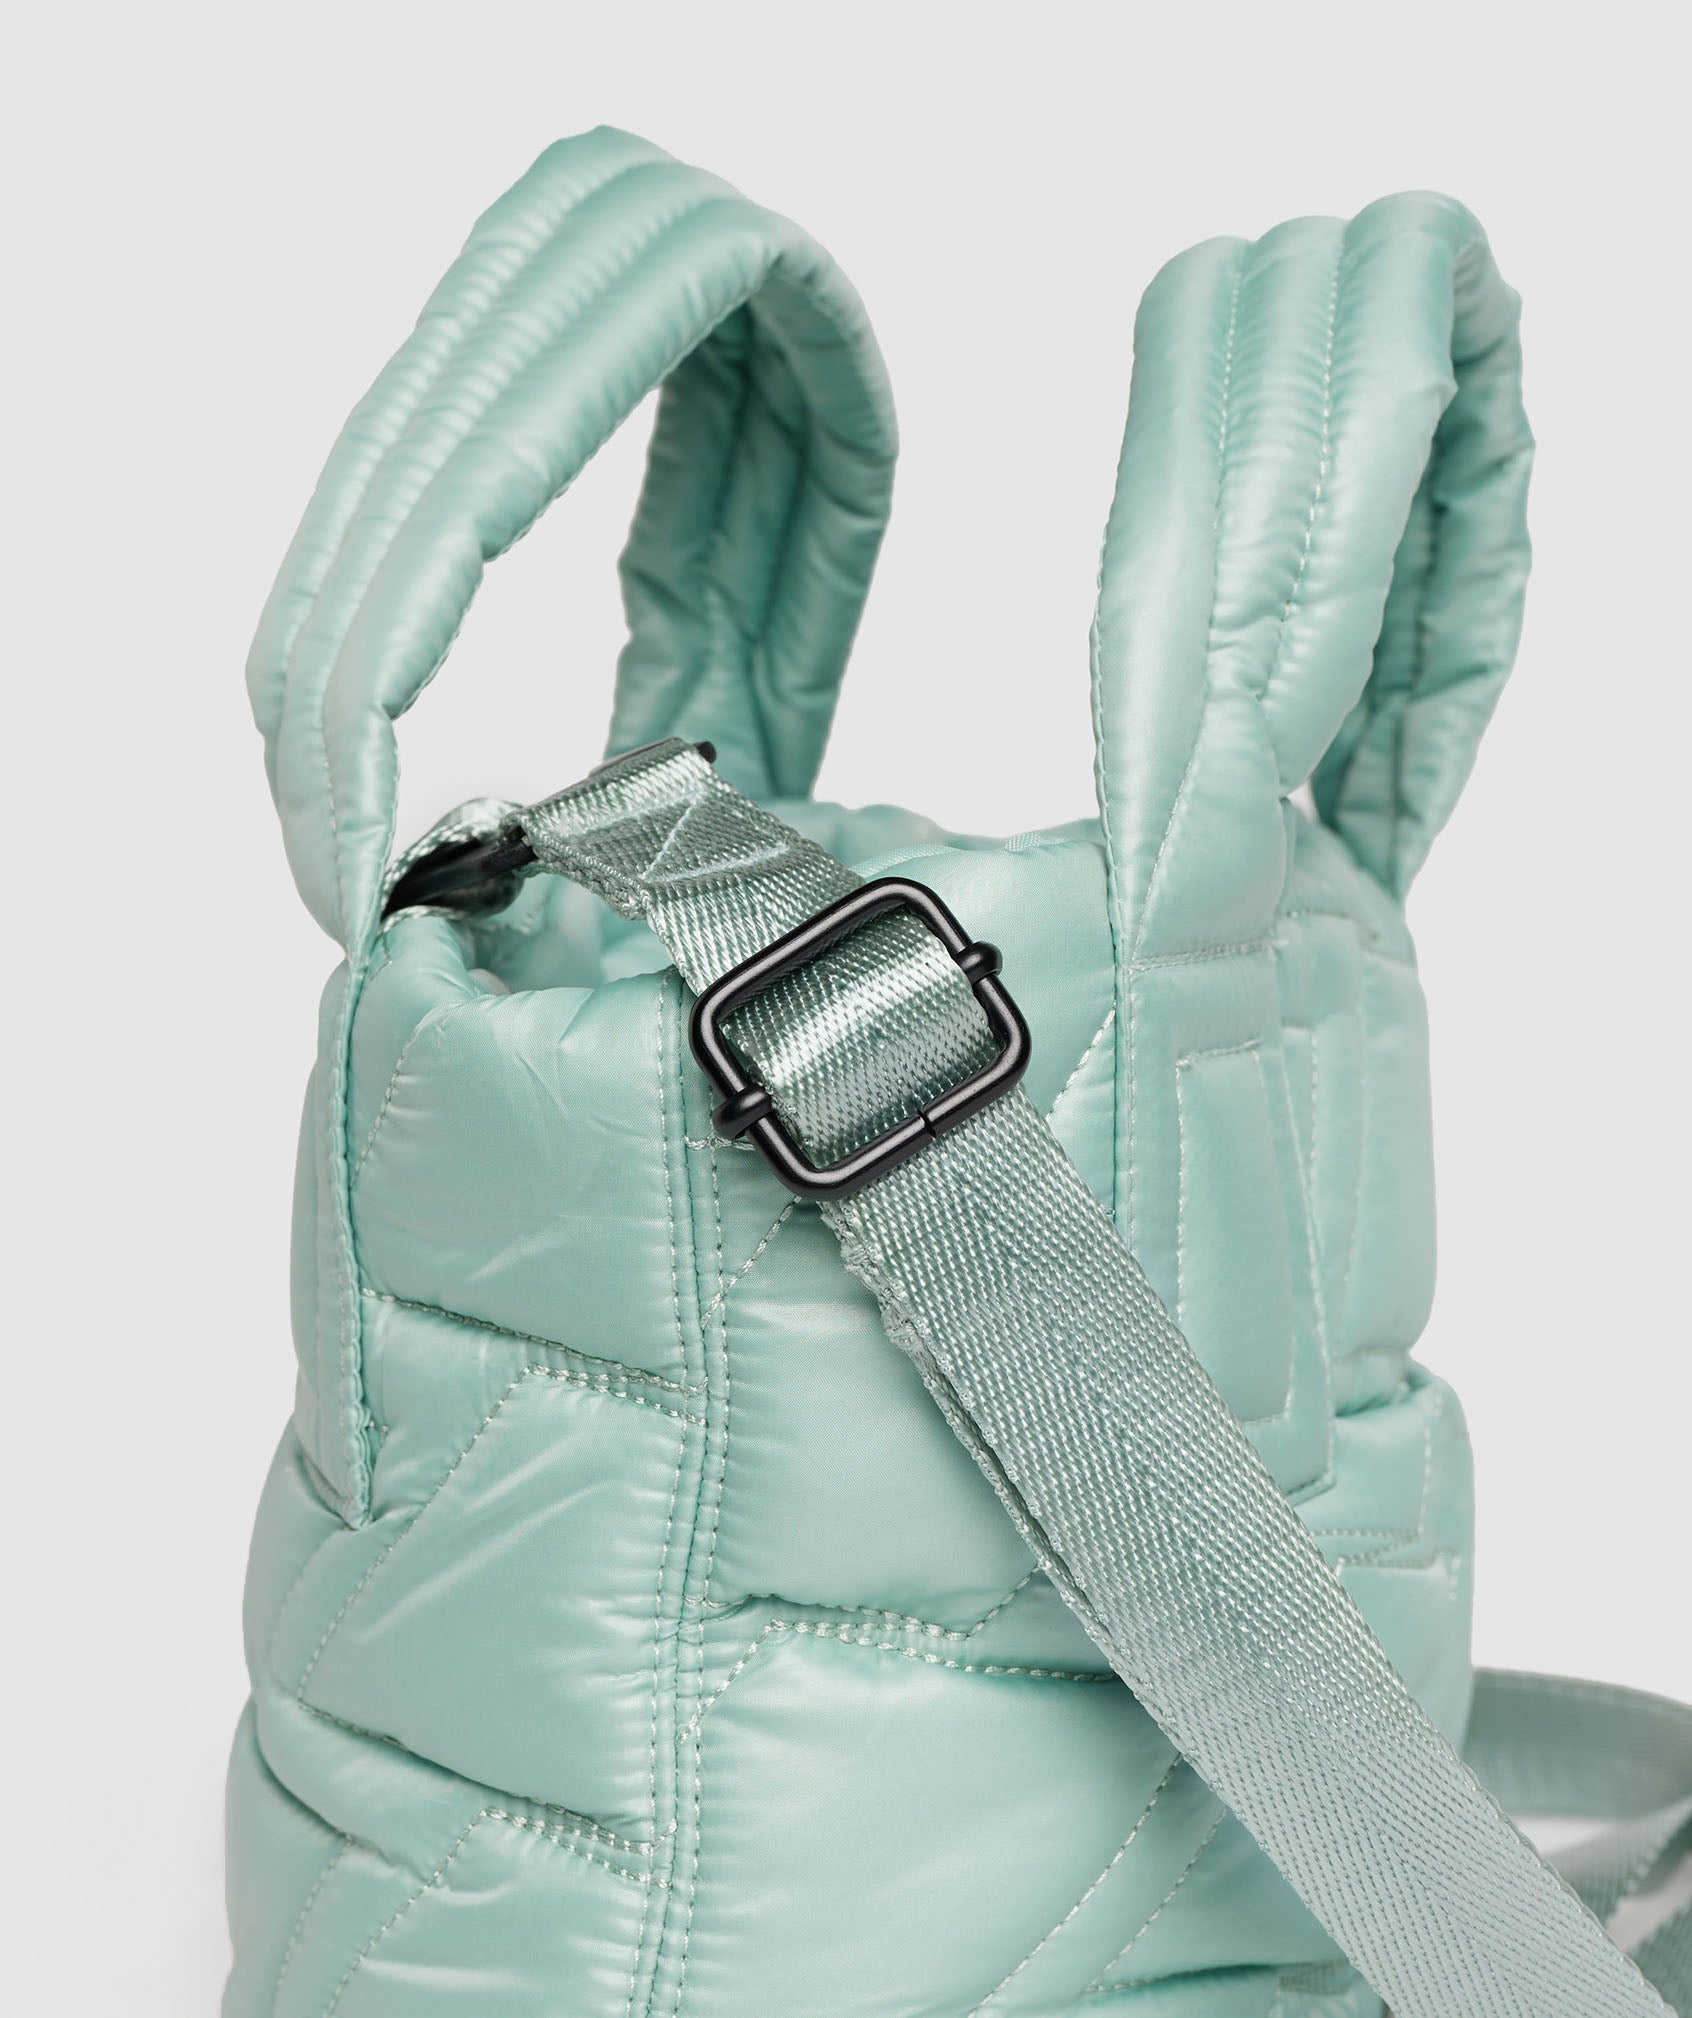 Quilted Mini Tote in Frost Teal